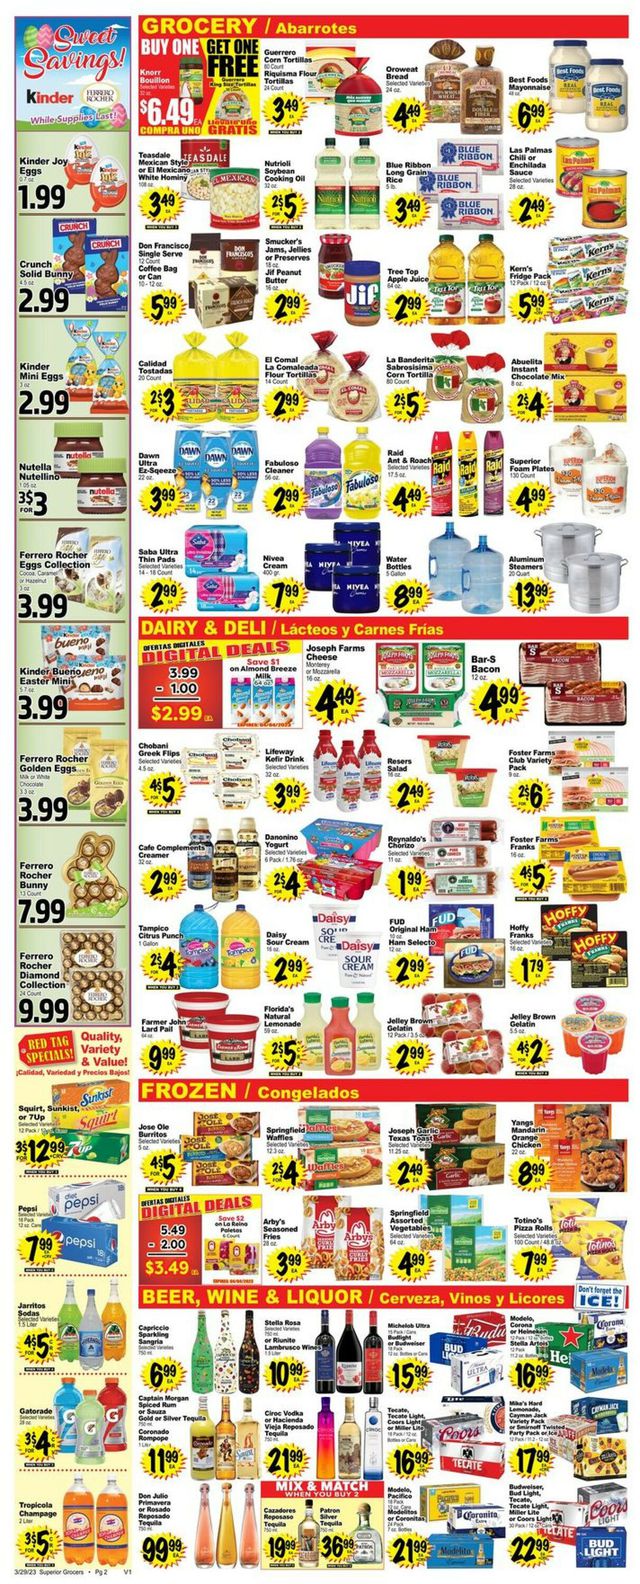 Superior Grocers Ad from 03/29/2023